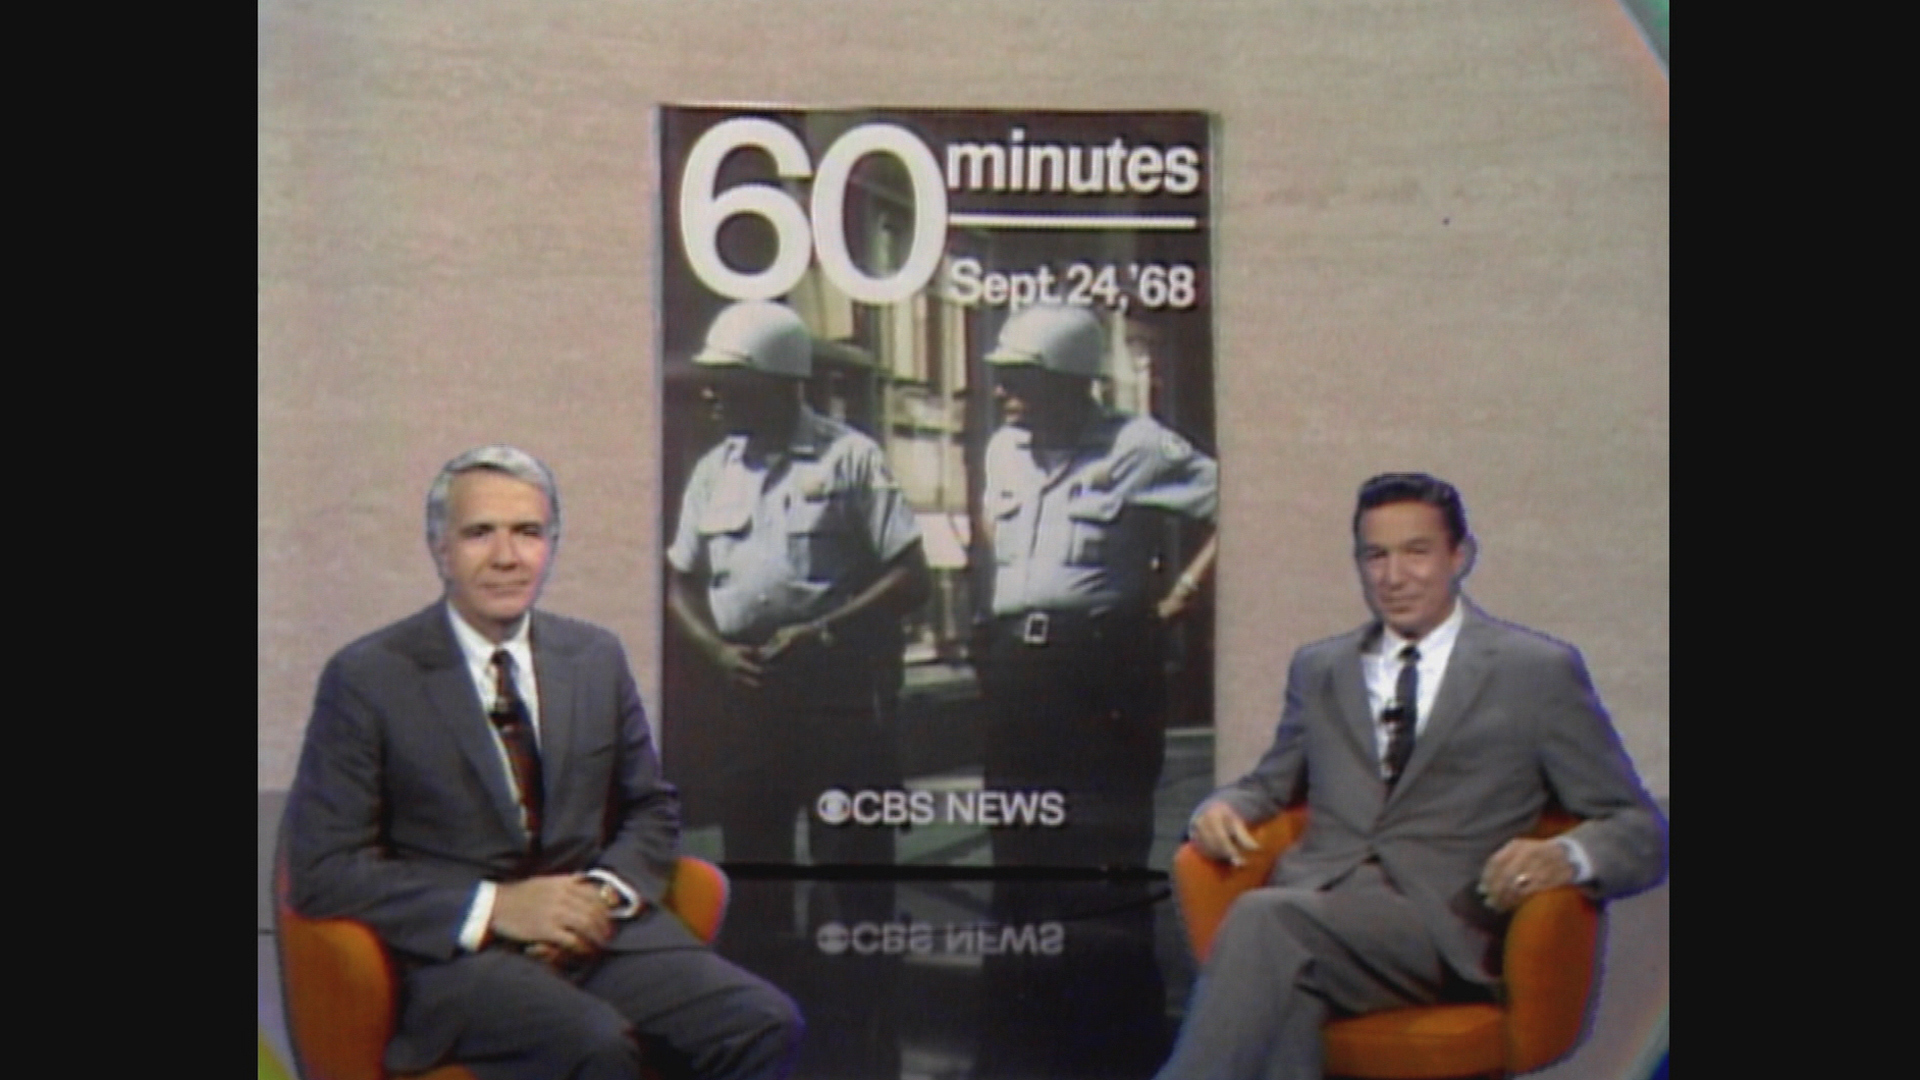 Watch 60 Minutes Overtime The first 60 Minutes Full show on CBS